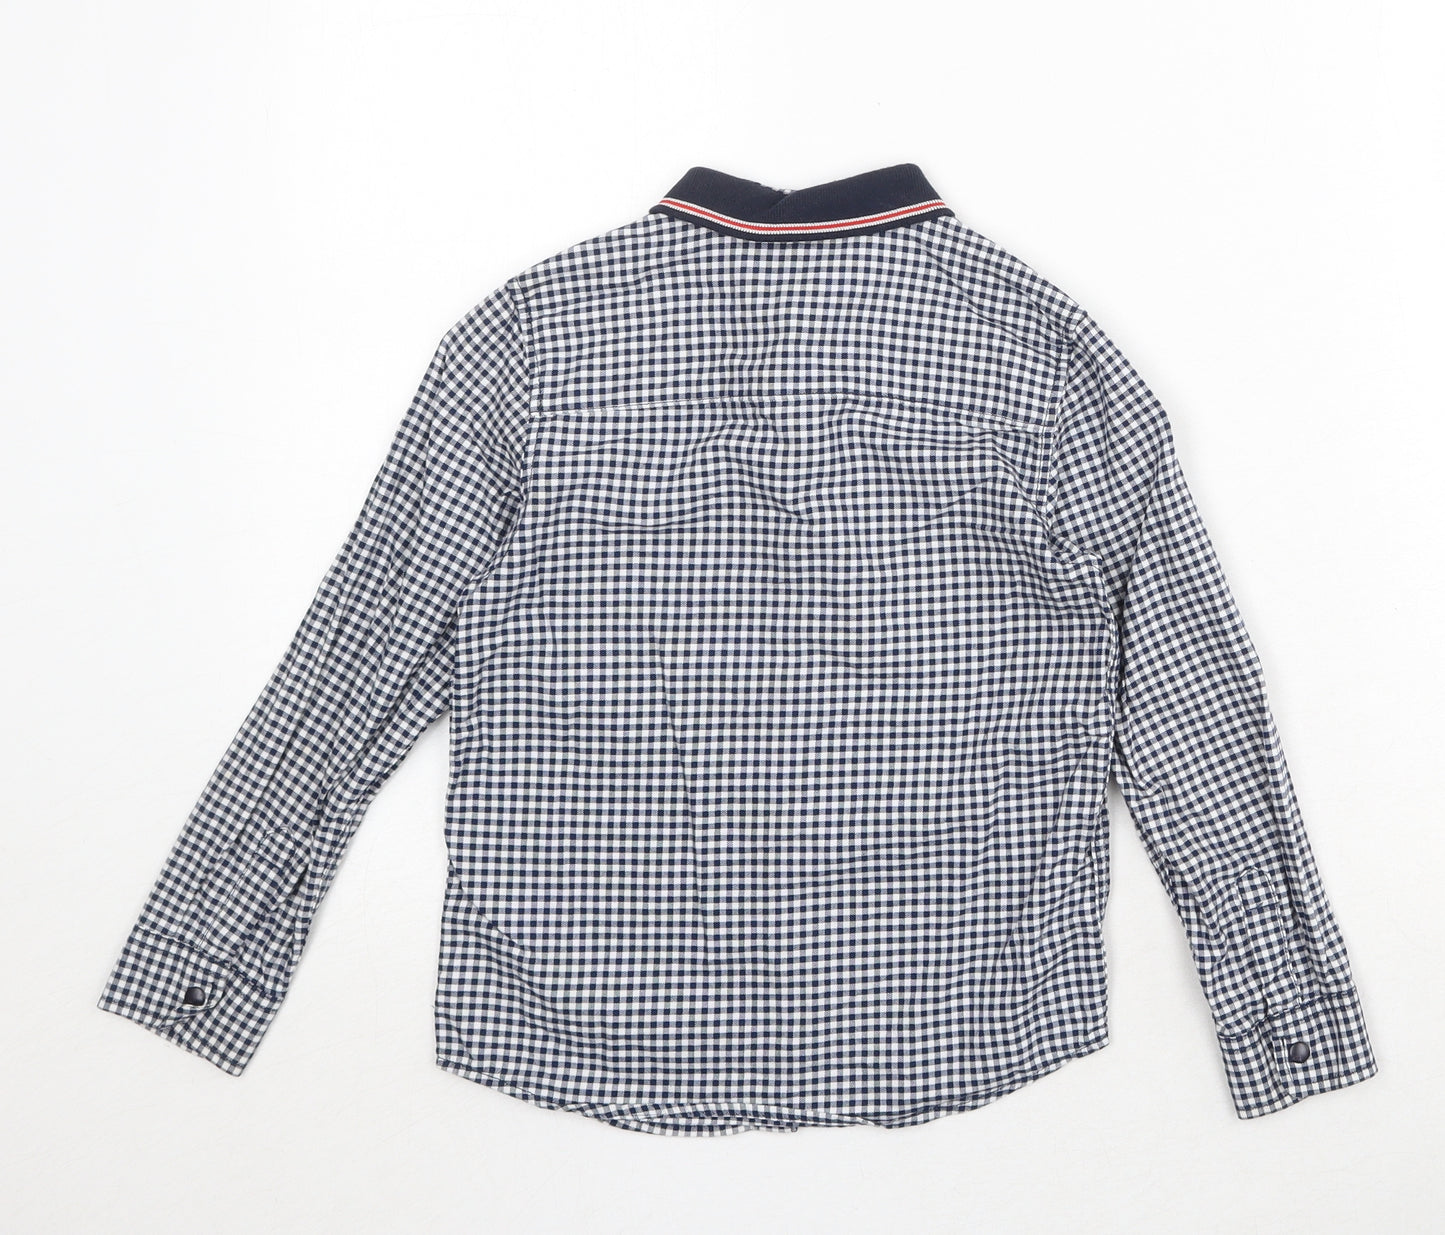 NEXT Boys Blue Check 100% Cotton Basic Button-Up Size 5-6 Years Collared Snap